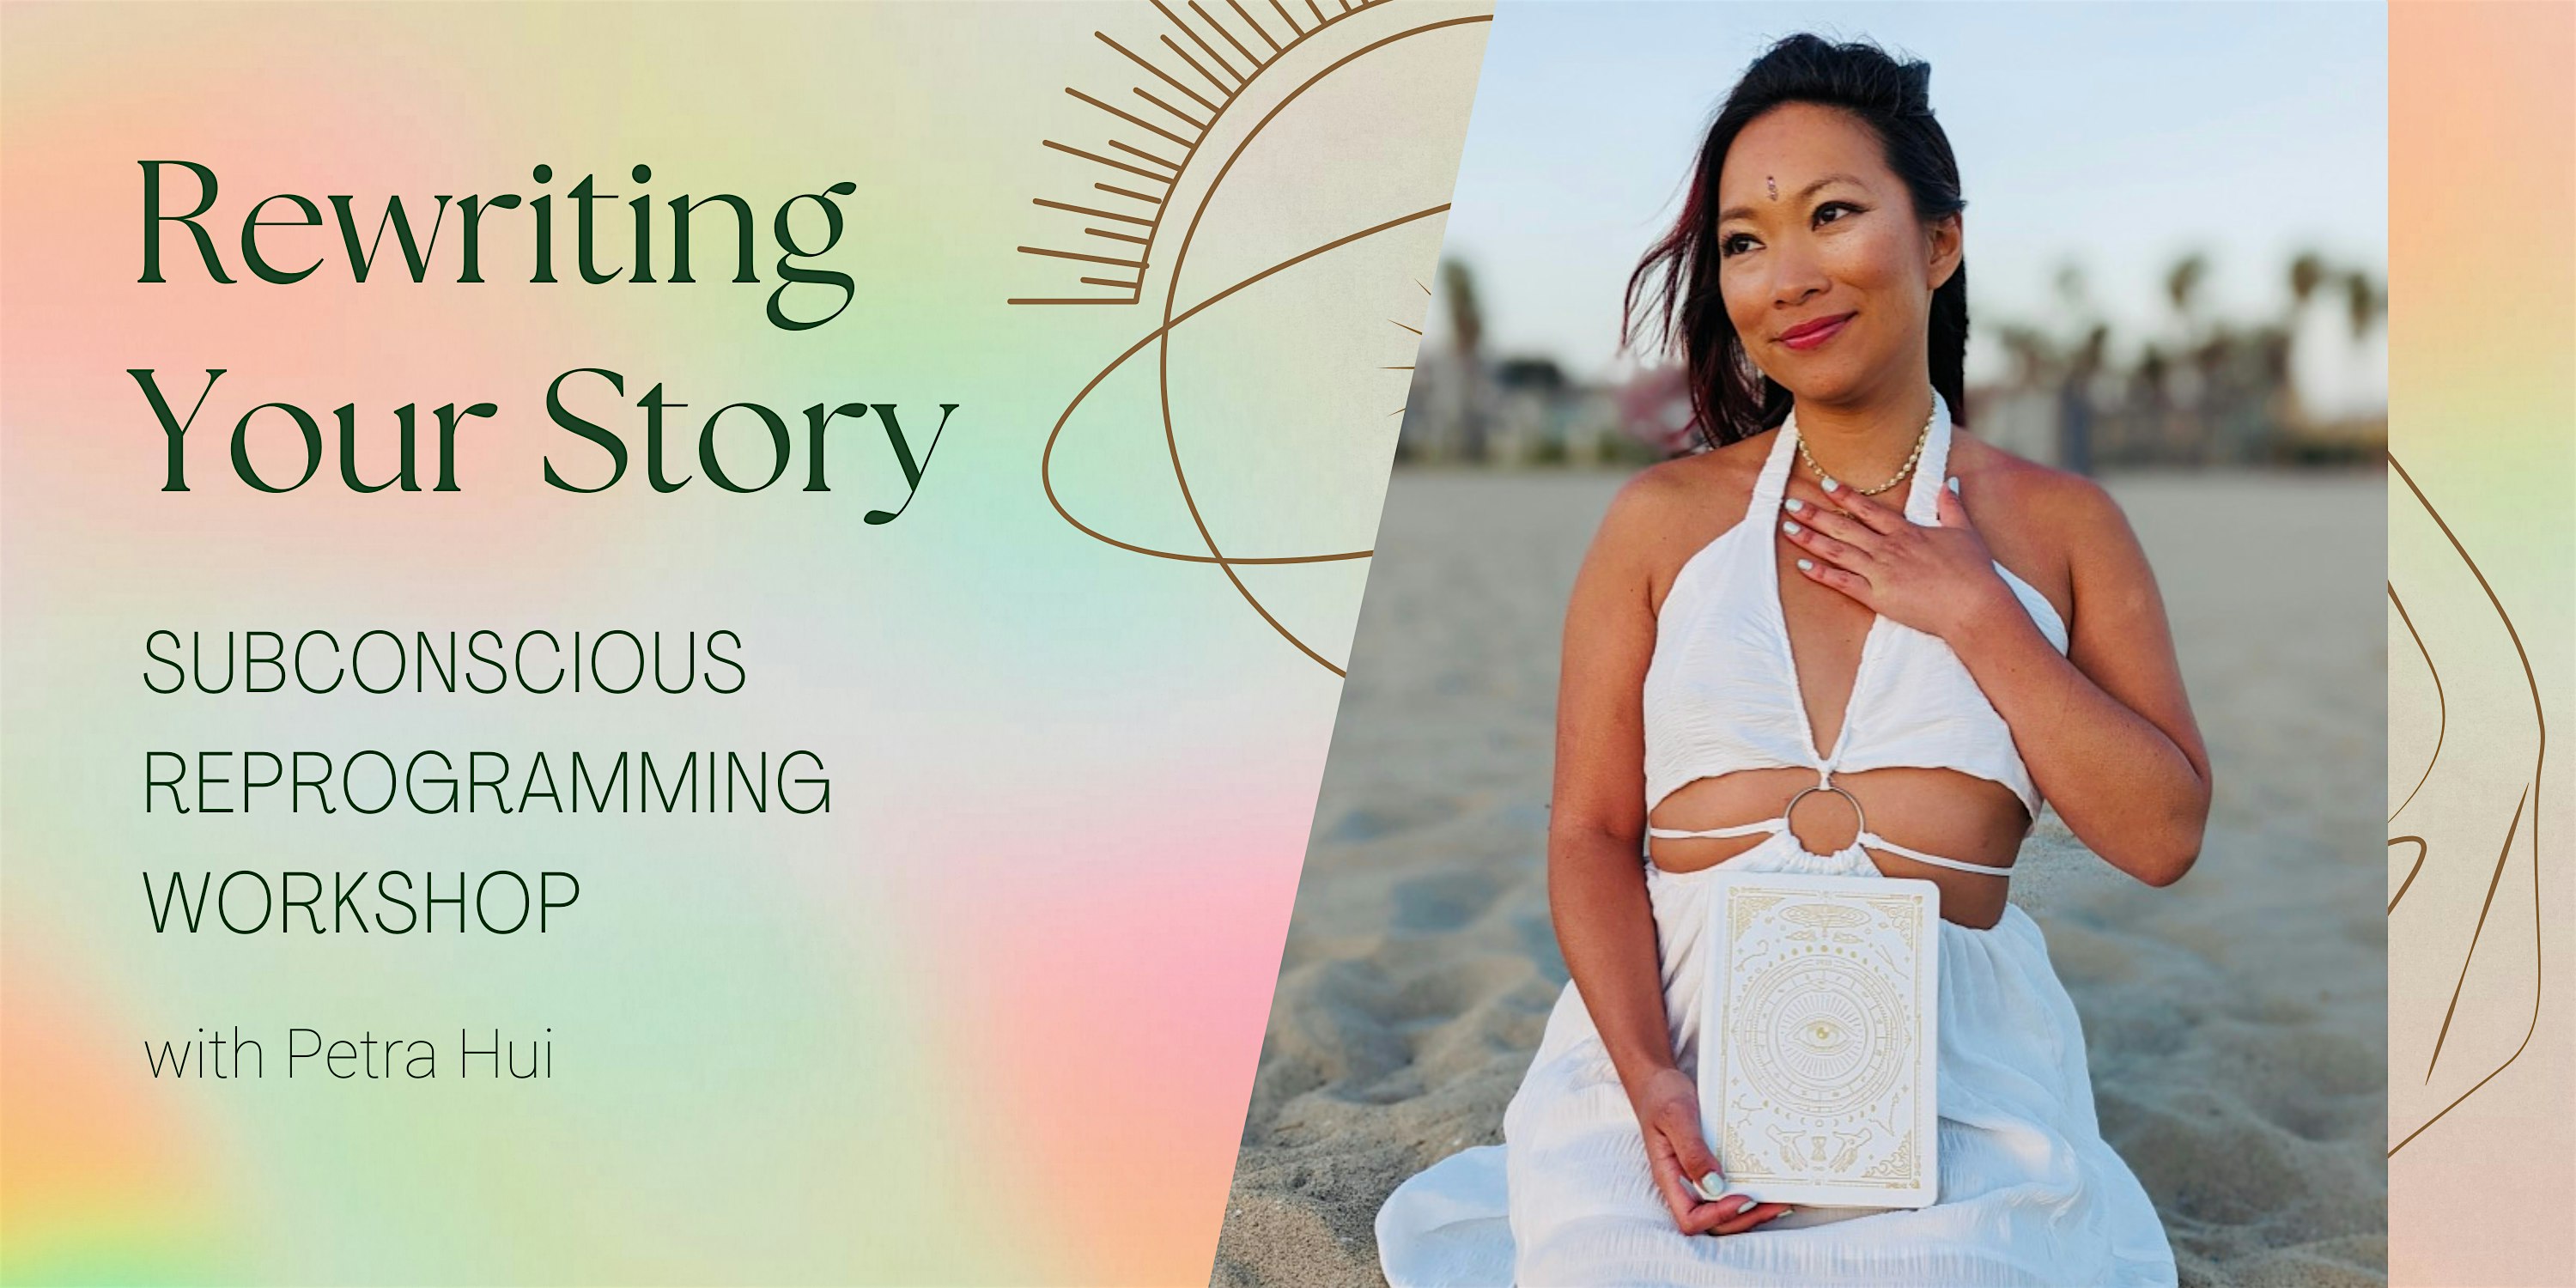 Rewriting Your Story | Subconscious Reprogramming Workshop